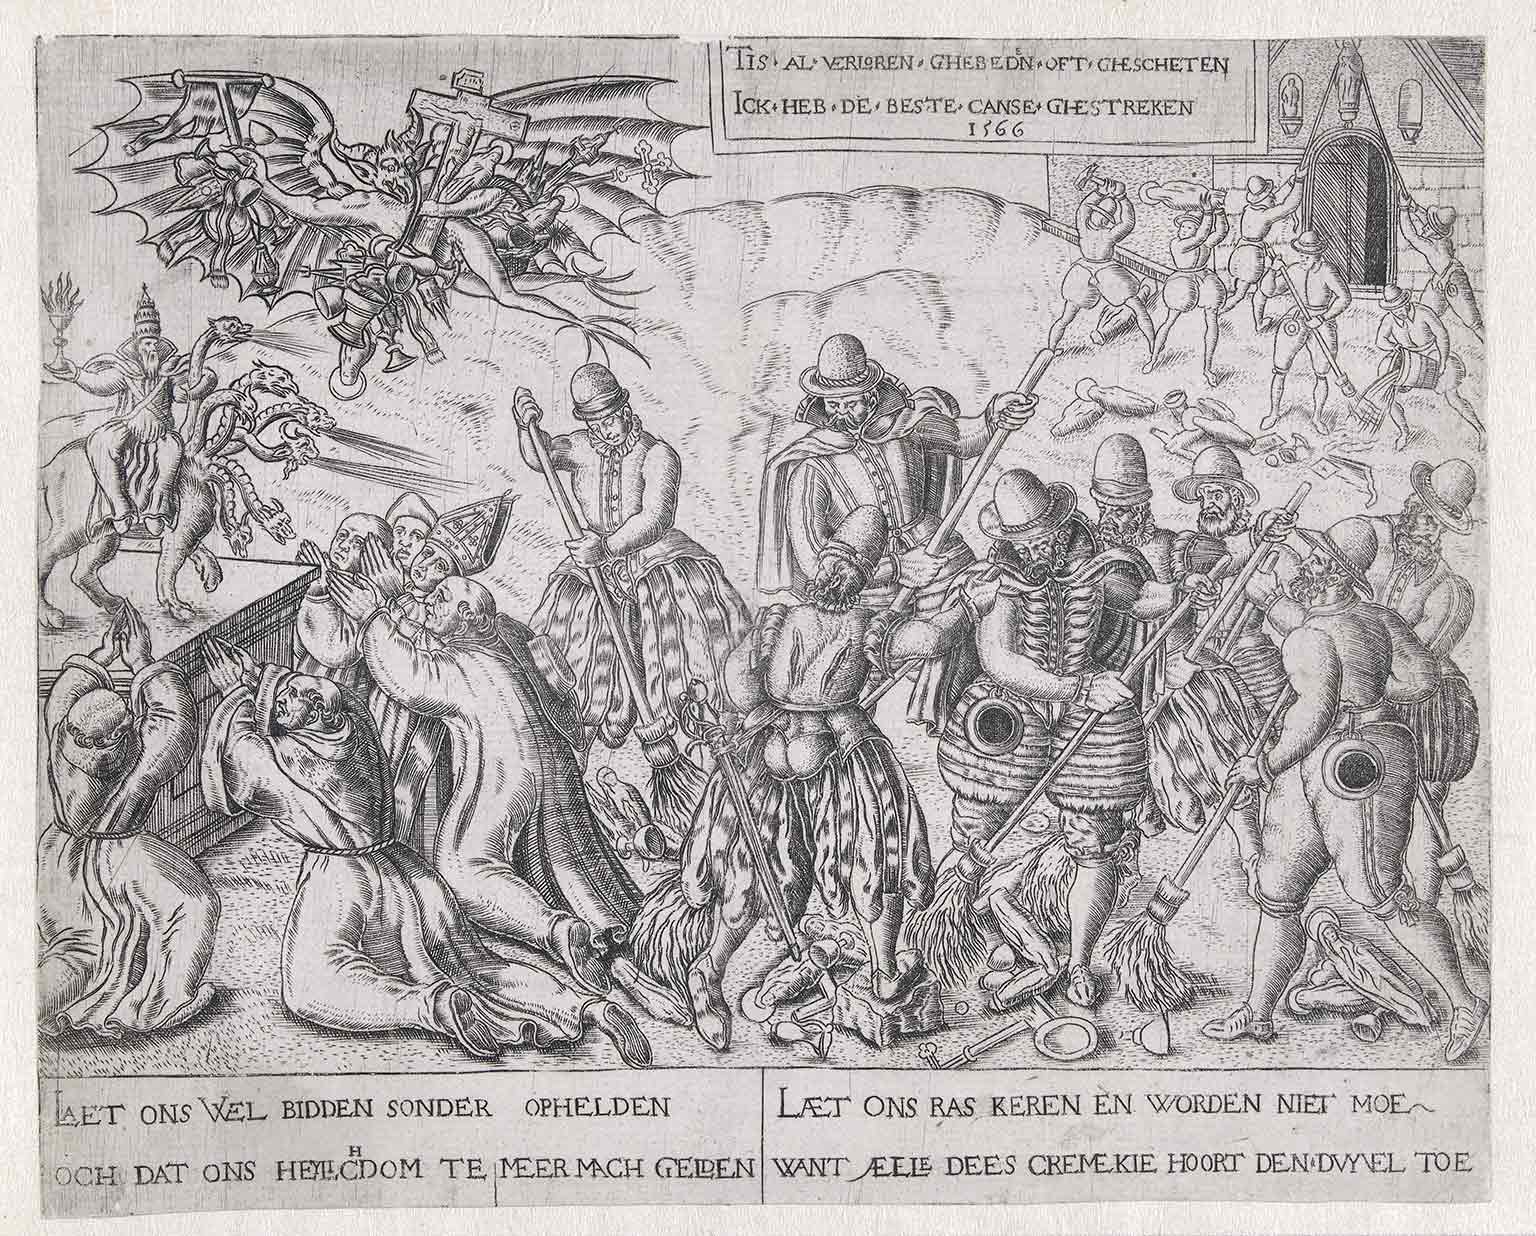 Protestant polemical print from 1566, celebrating the destruction and cleaning up of Catholic imagery